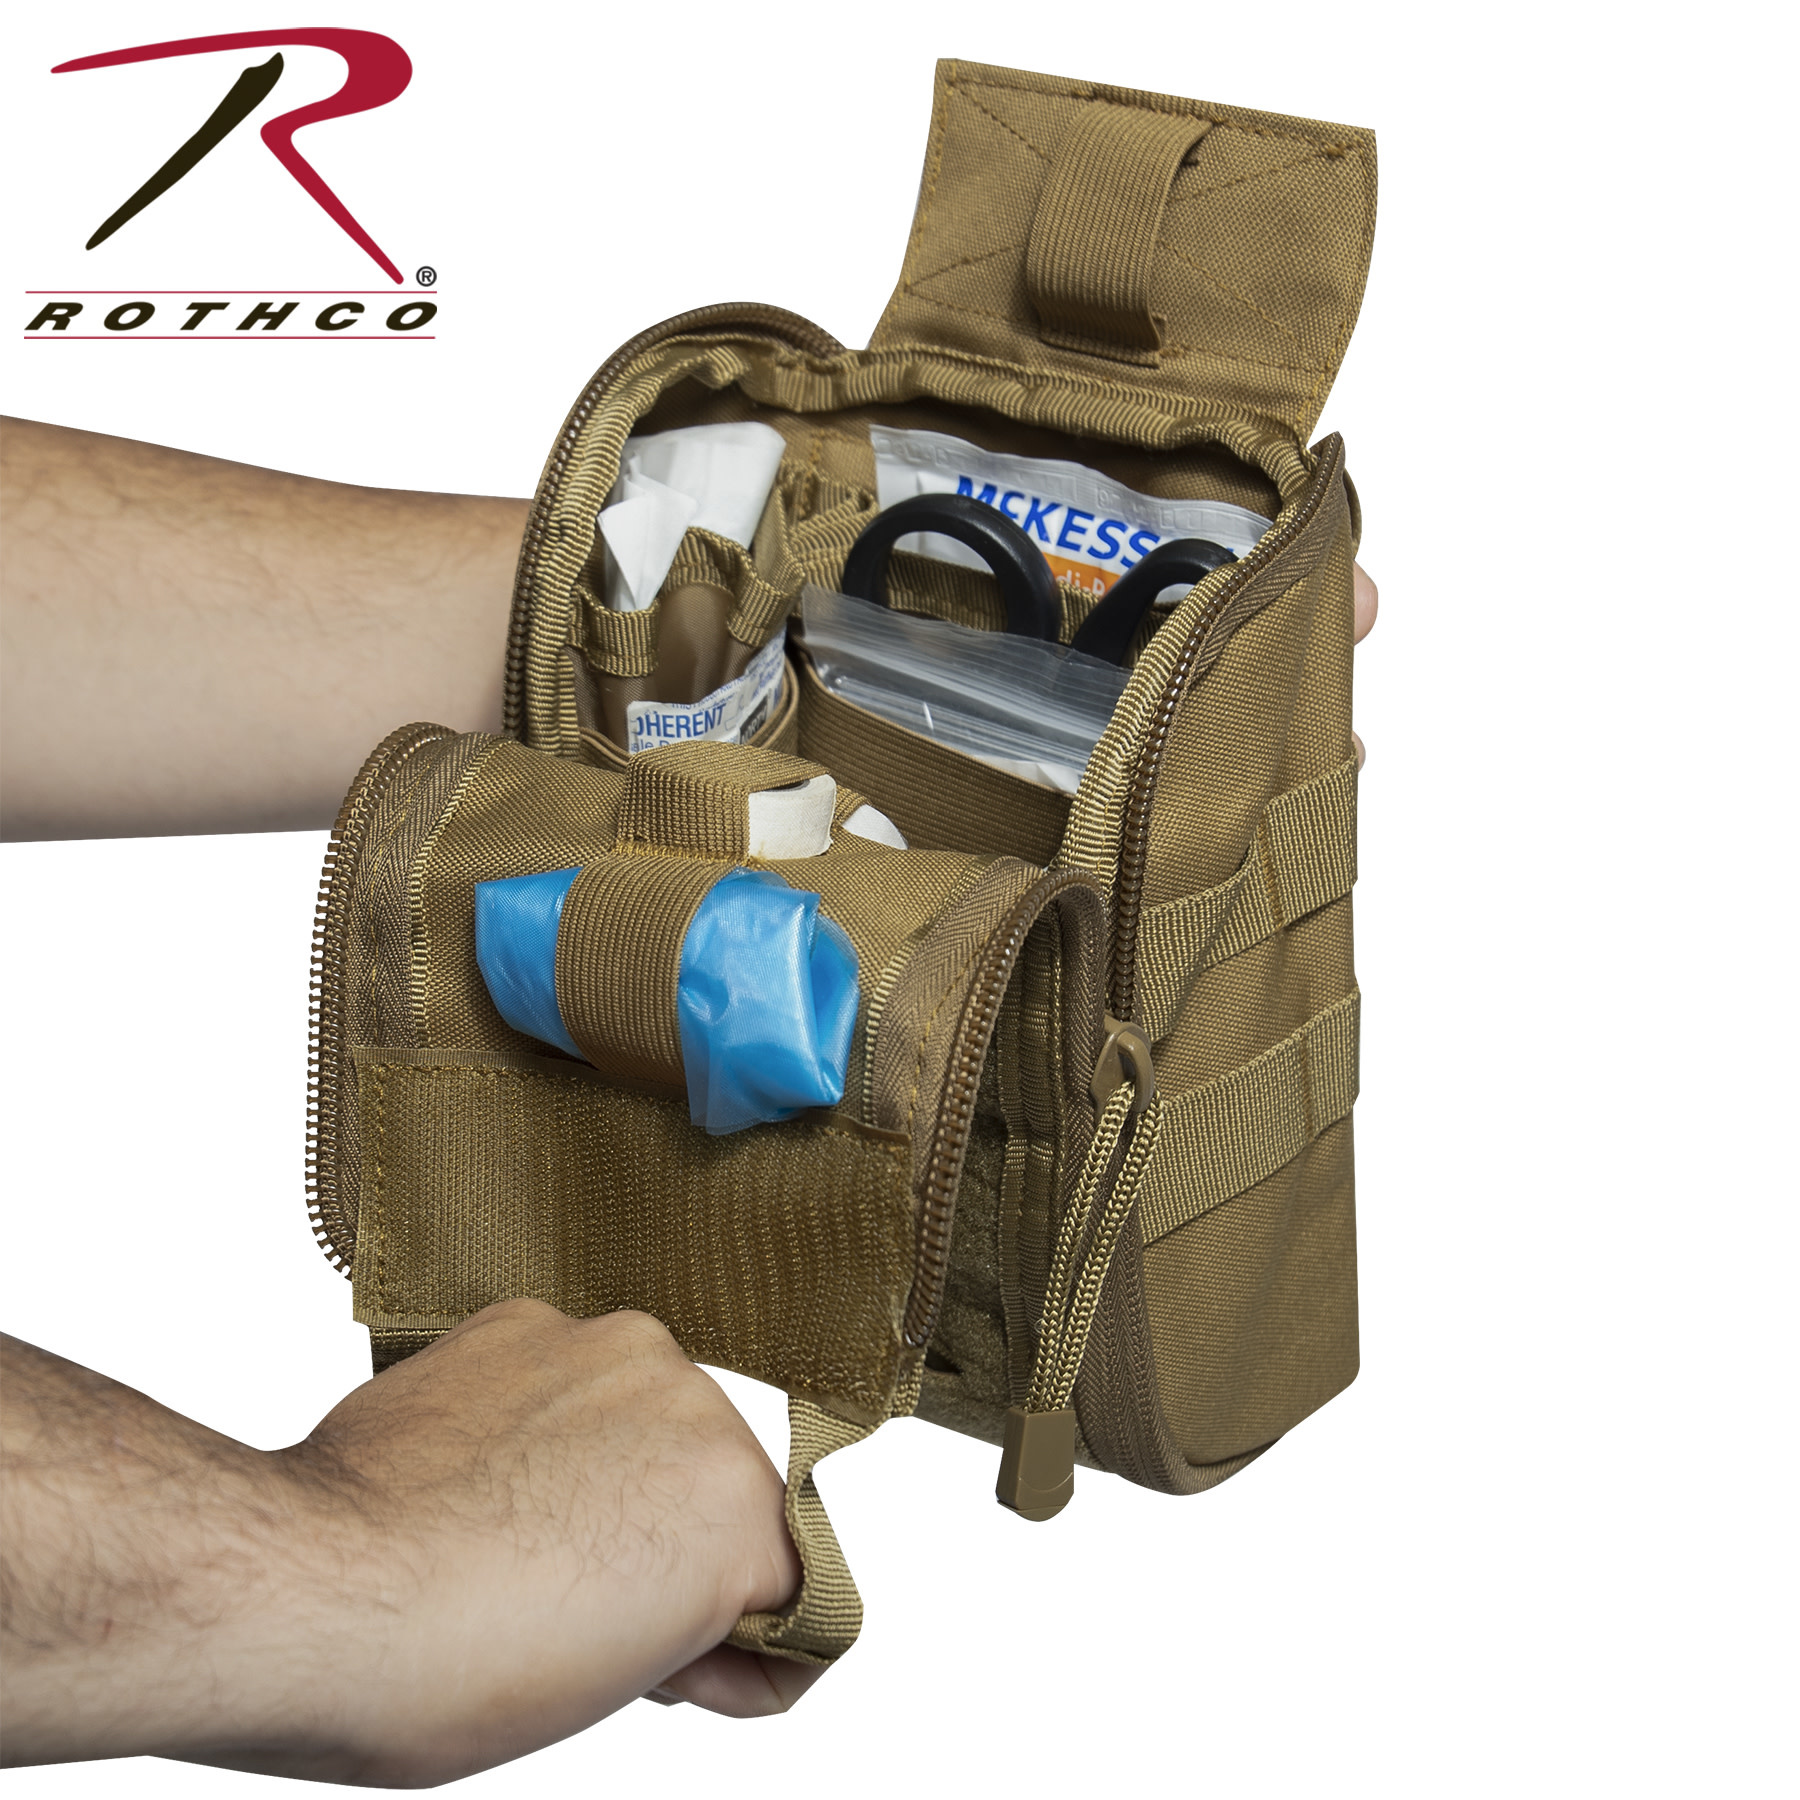 https://cdn.shoplightspeed.com/shops/622077/files/46240620/rothco-rothco-fast-action-molle-medical-pouch.jpg